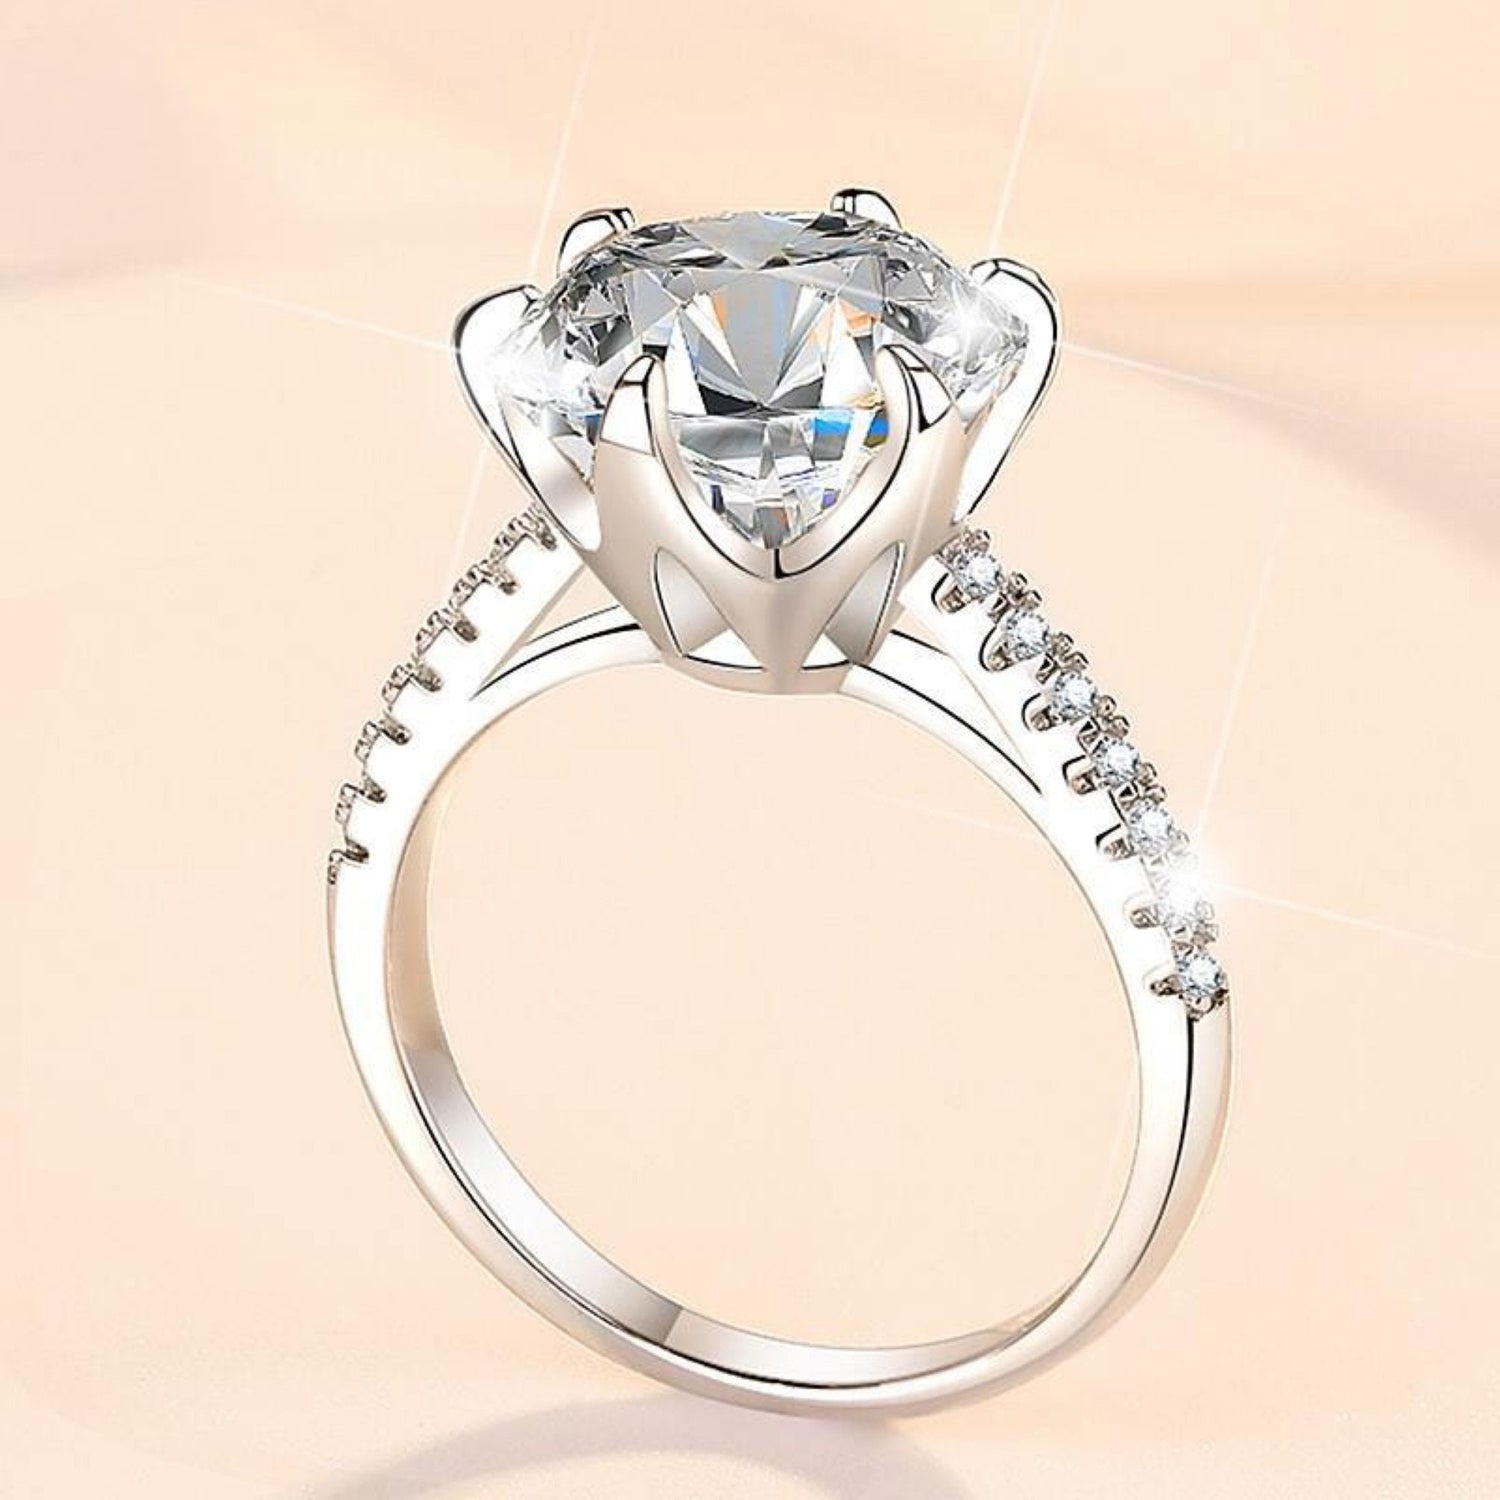 6-Prong Round Engagement Ring in 925 Sterling Silver / 5ct Moissanite or CZ Engagement Ring / Solitaire Moissanite Ring / Gold Promise Ring